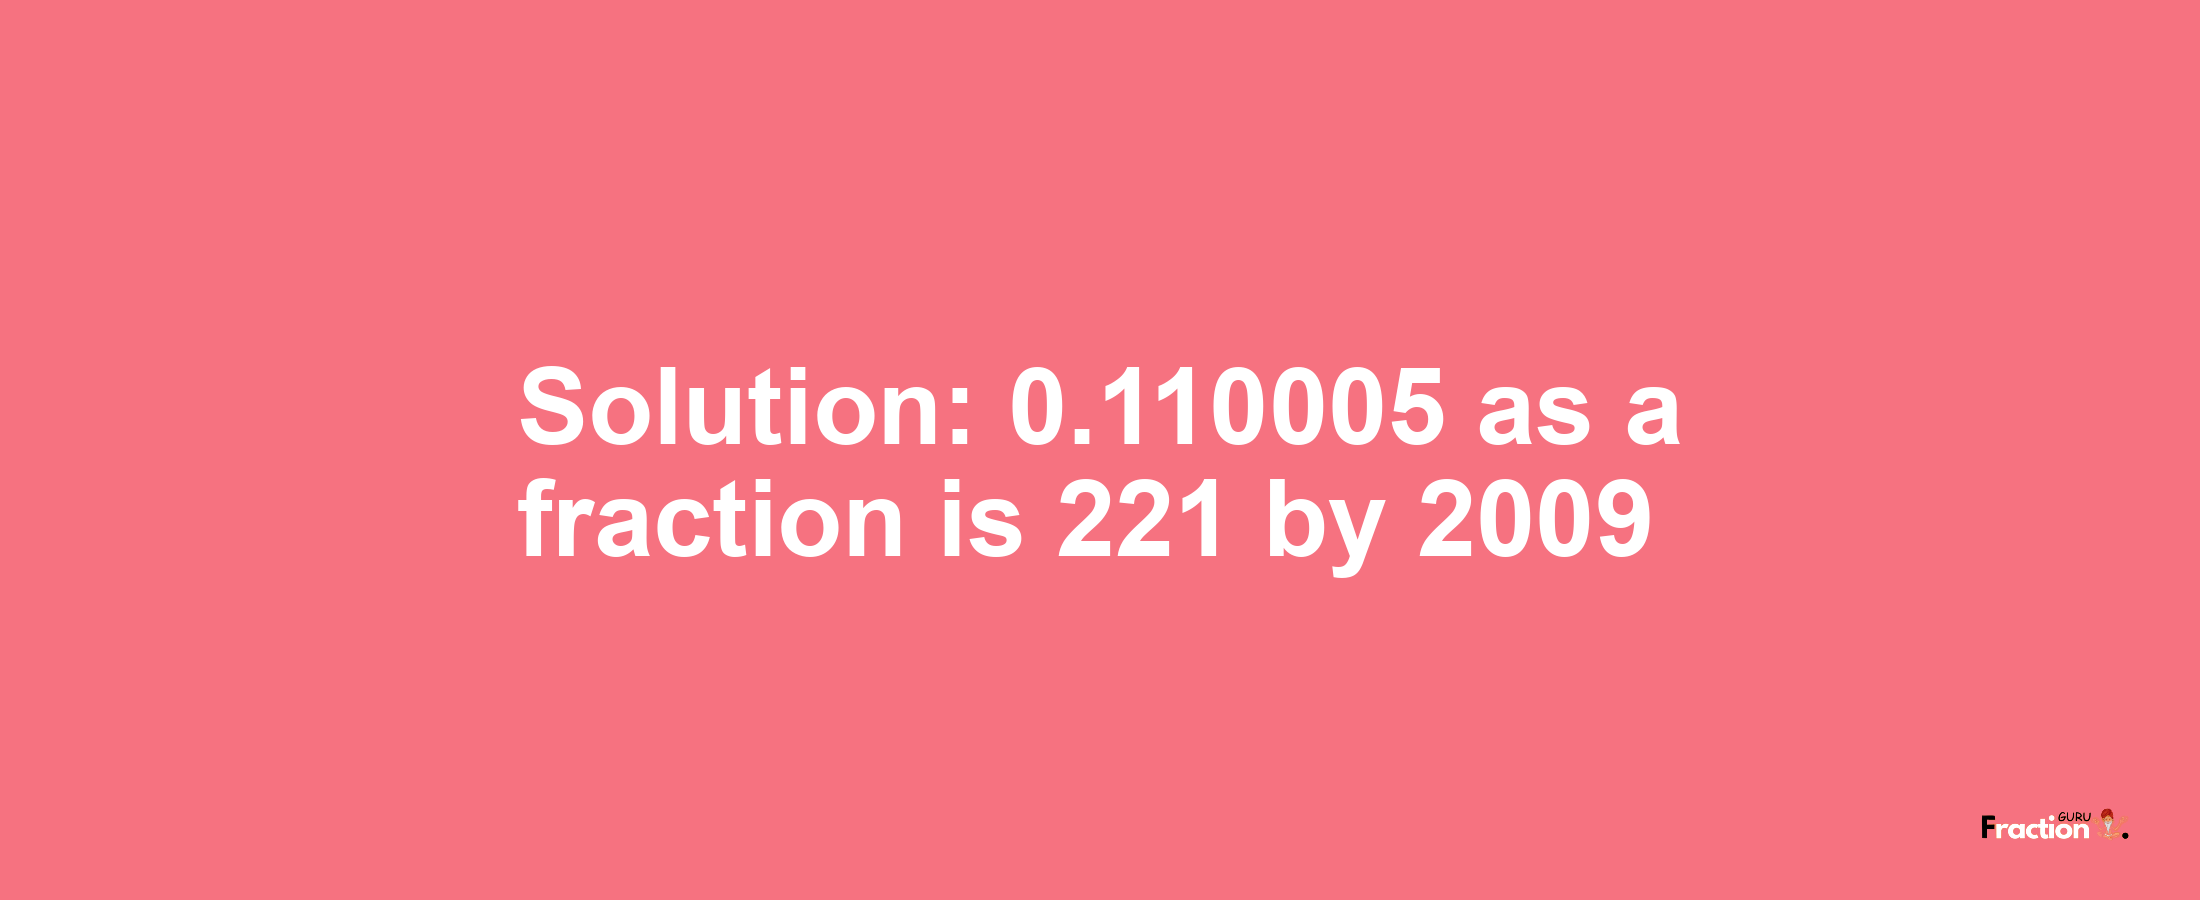 Solution:0.110005 as a fraction is 221/2009